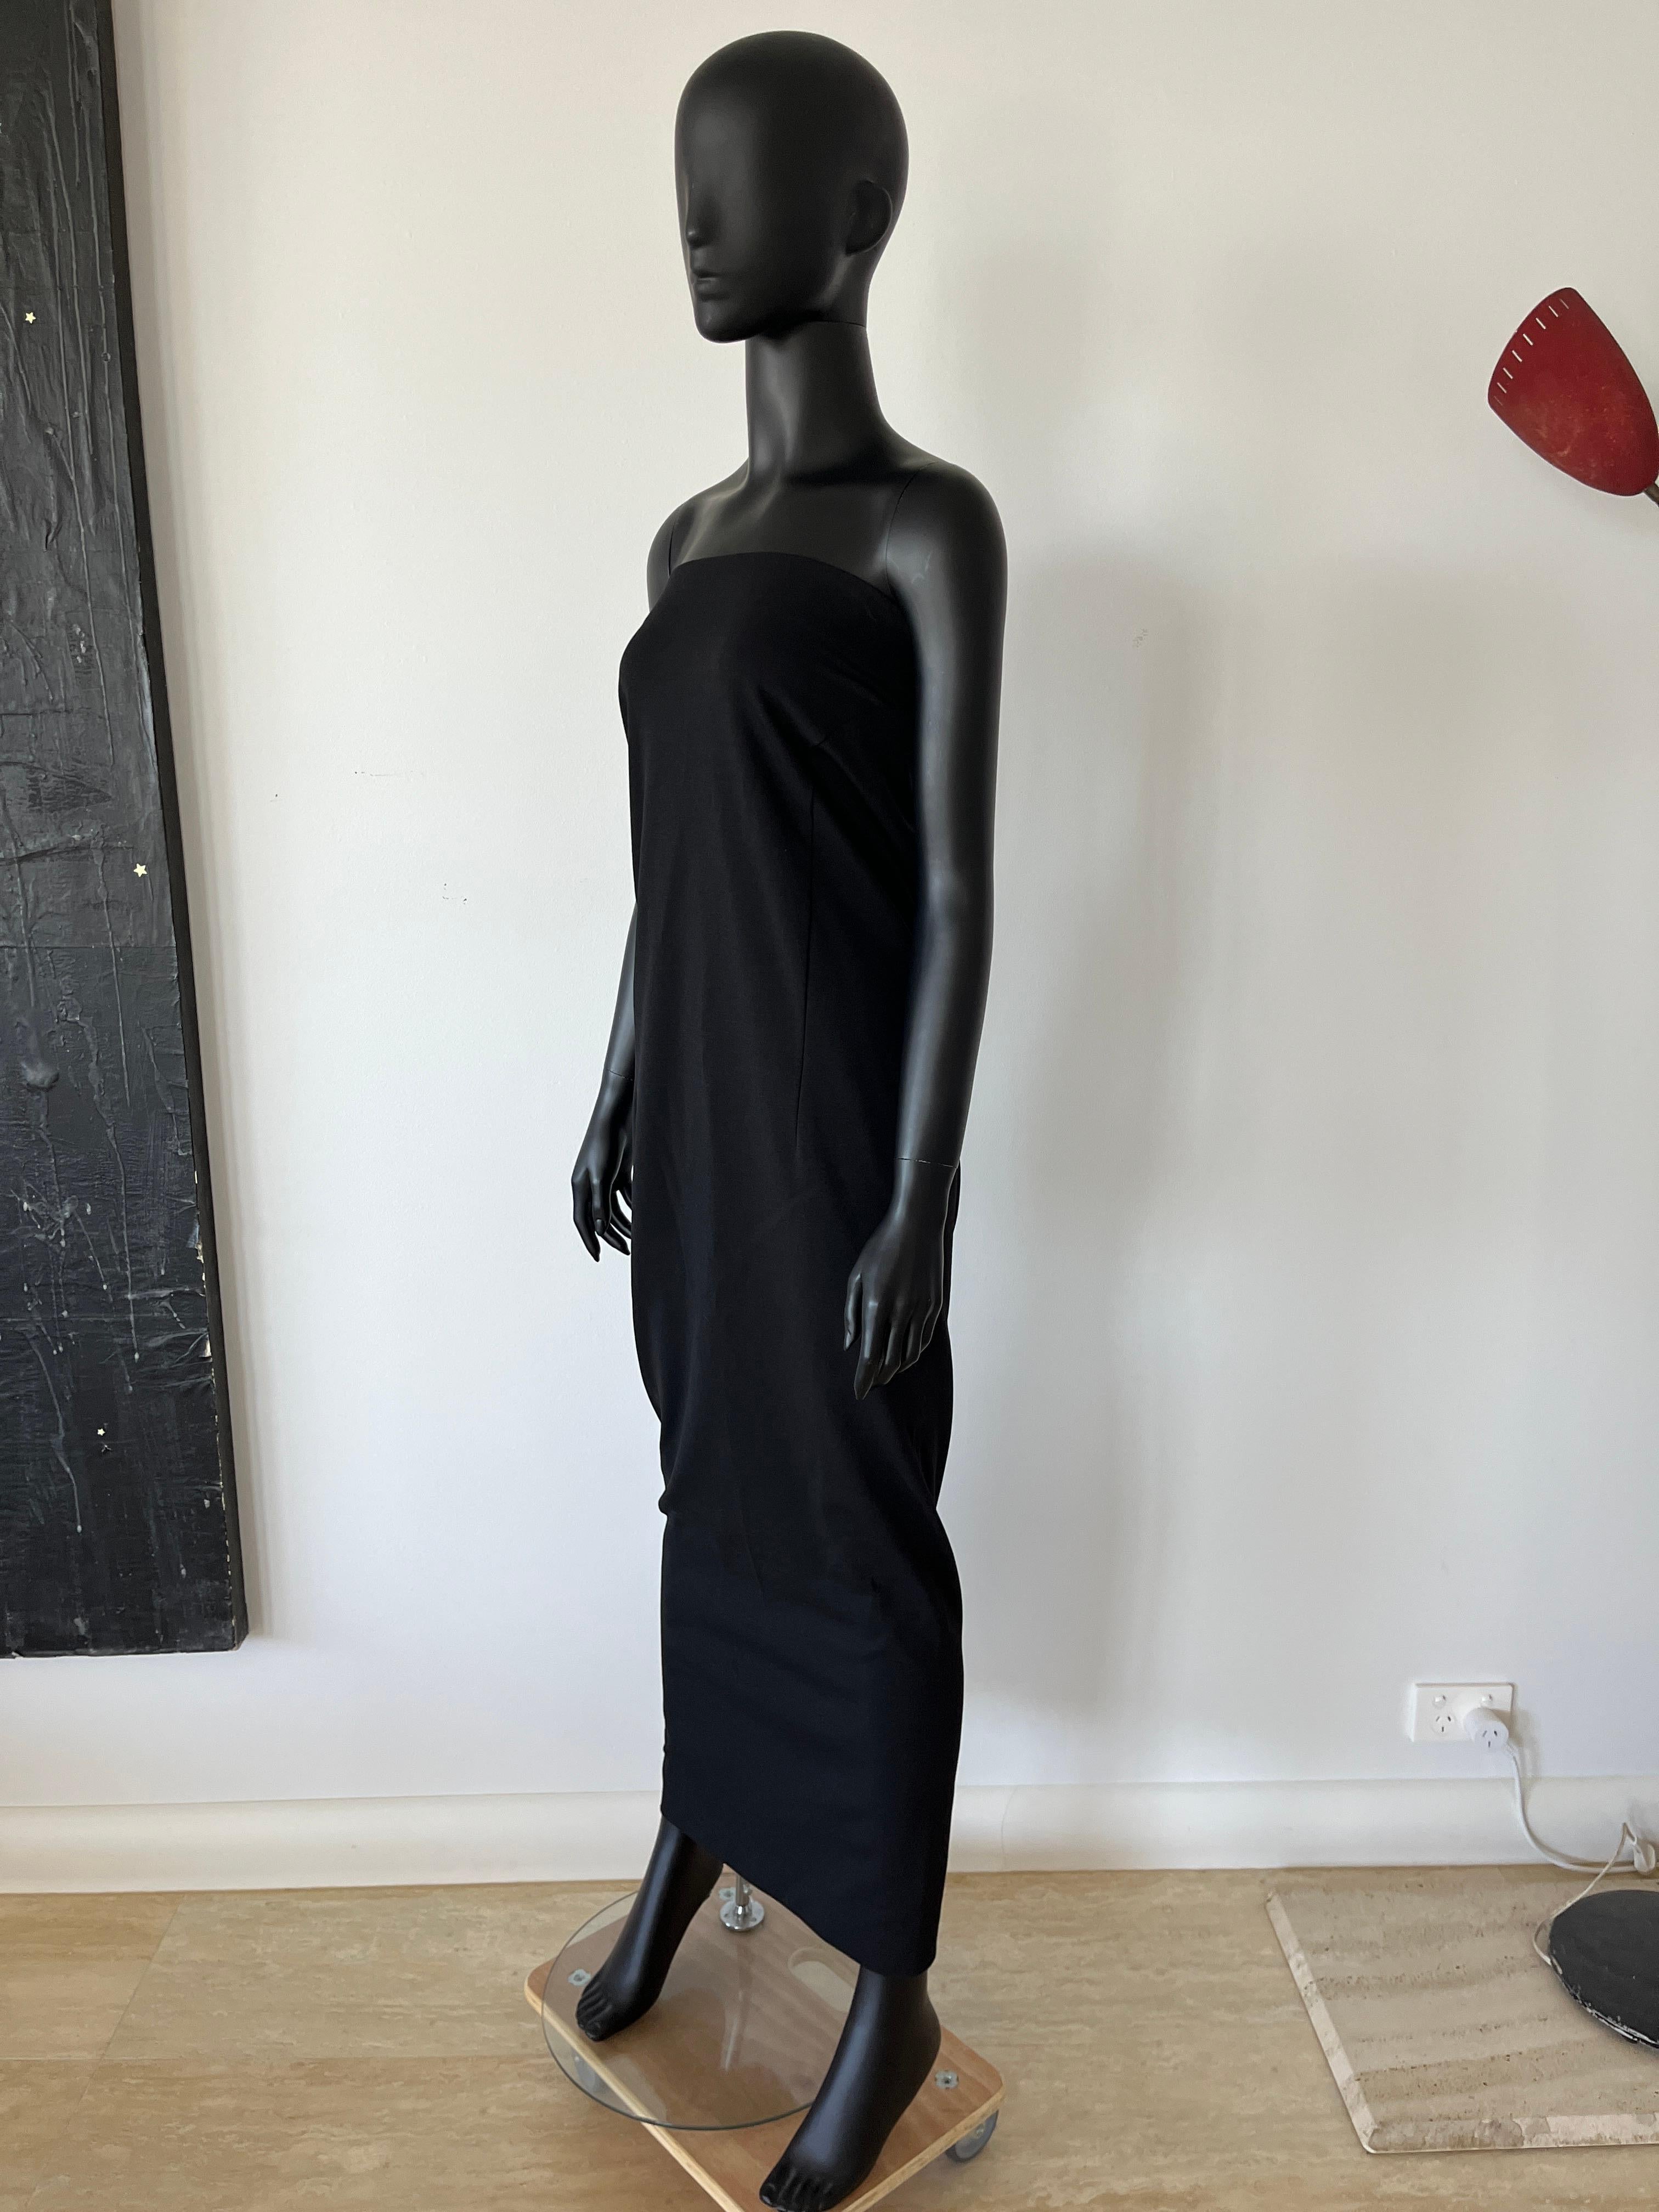 ACNE Stapless Tube dress In Good Condition For Sale In COLLINGWOOD, AU